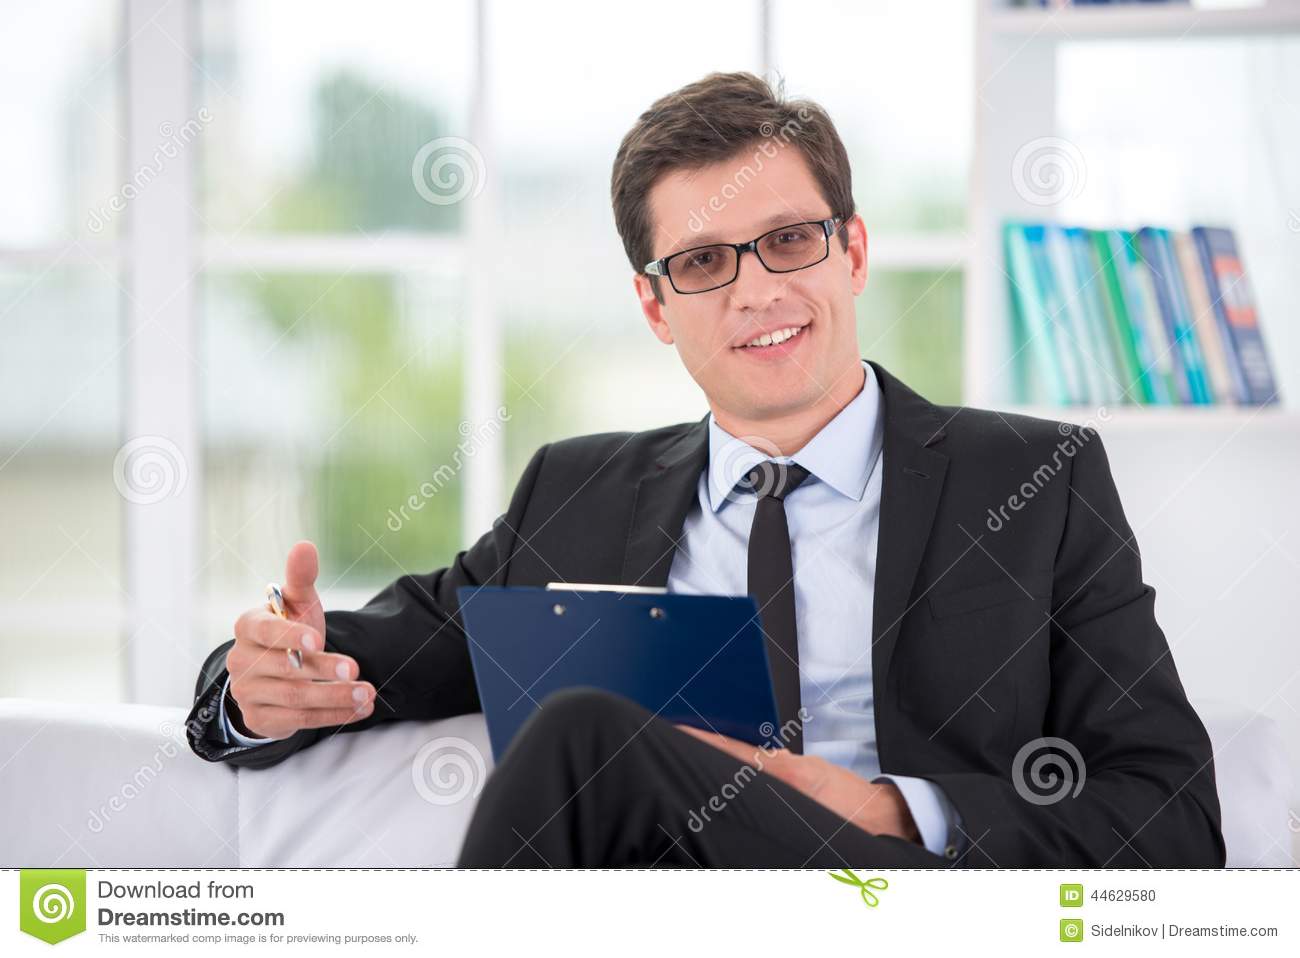 Portrait Of Male Psychologist In Office Stock Photo   Image  44629580